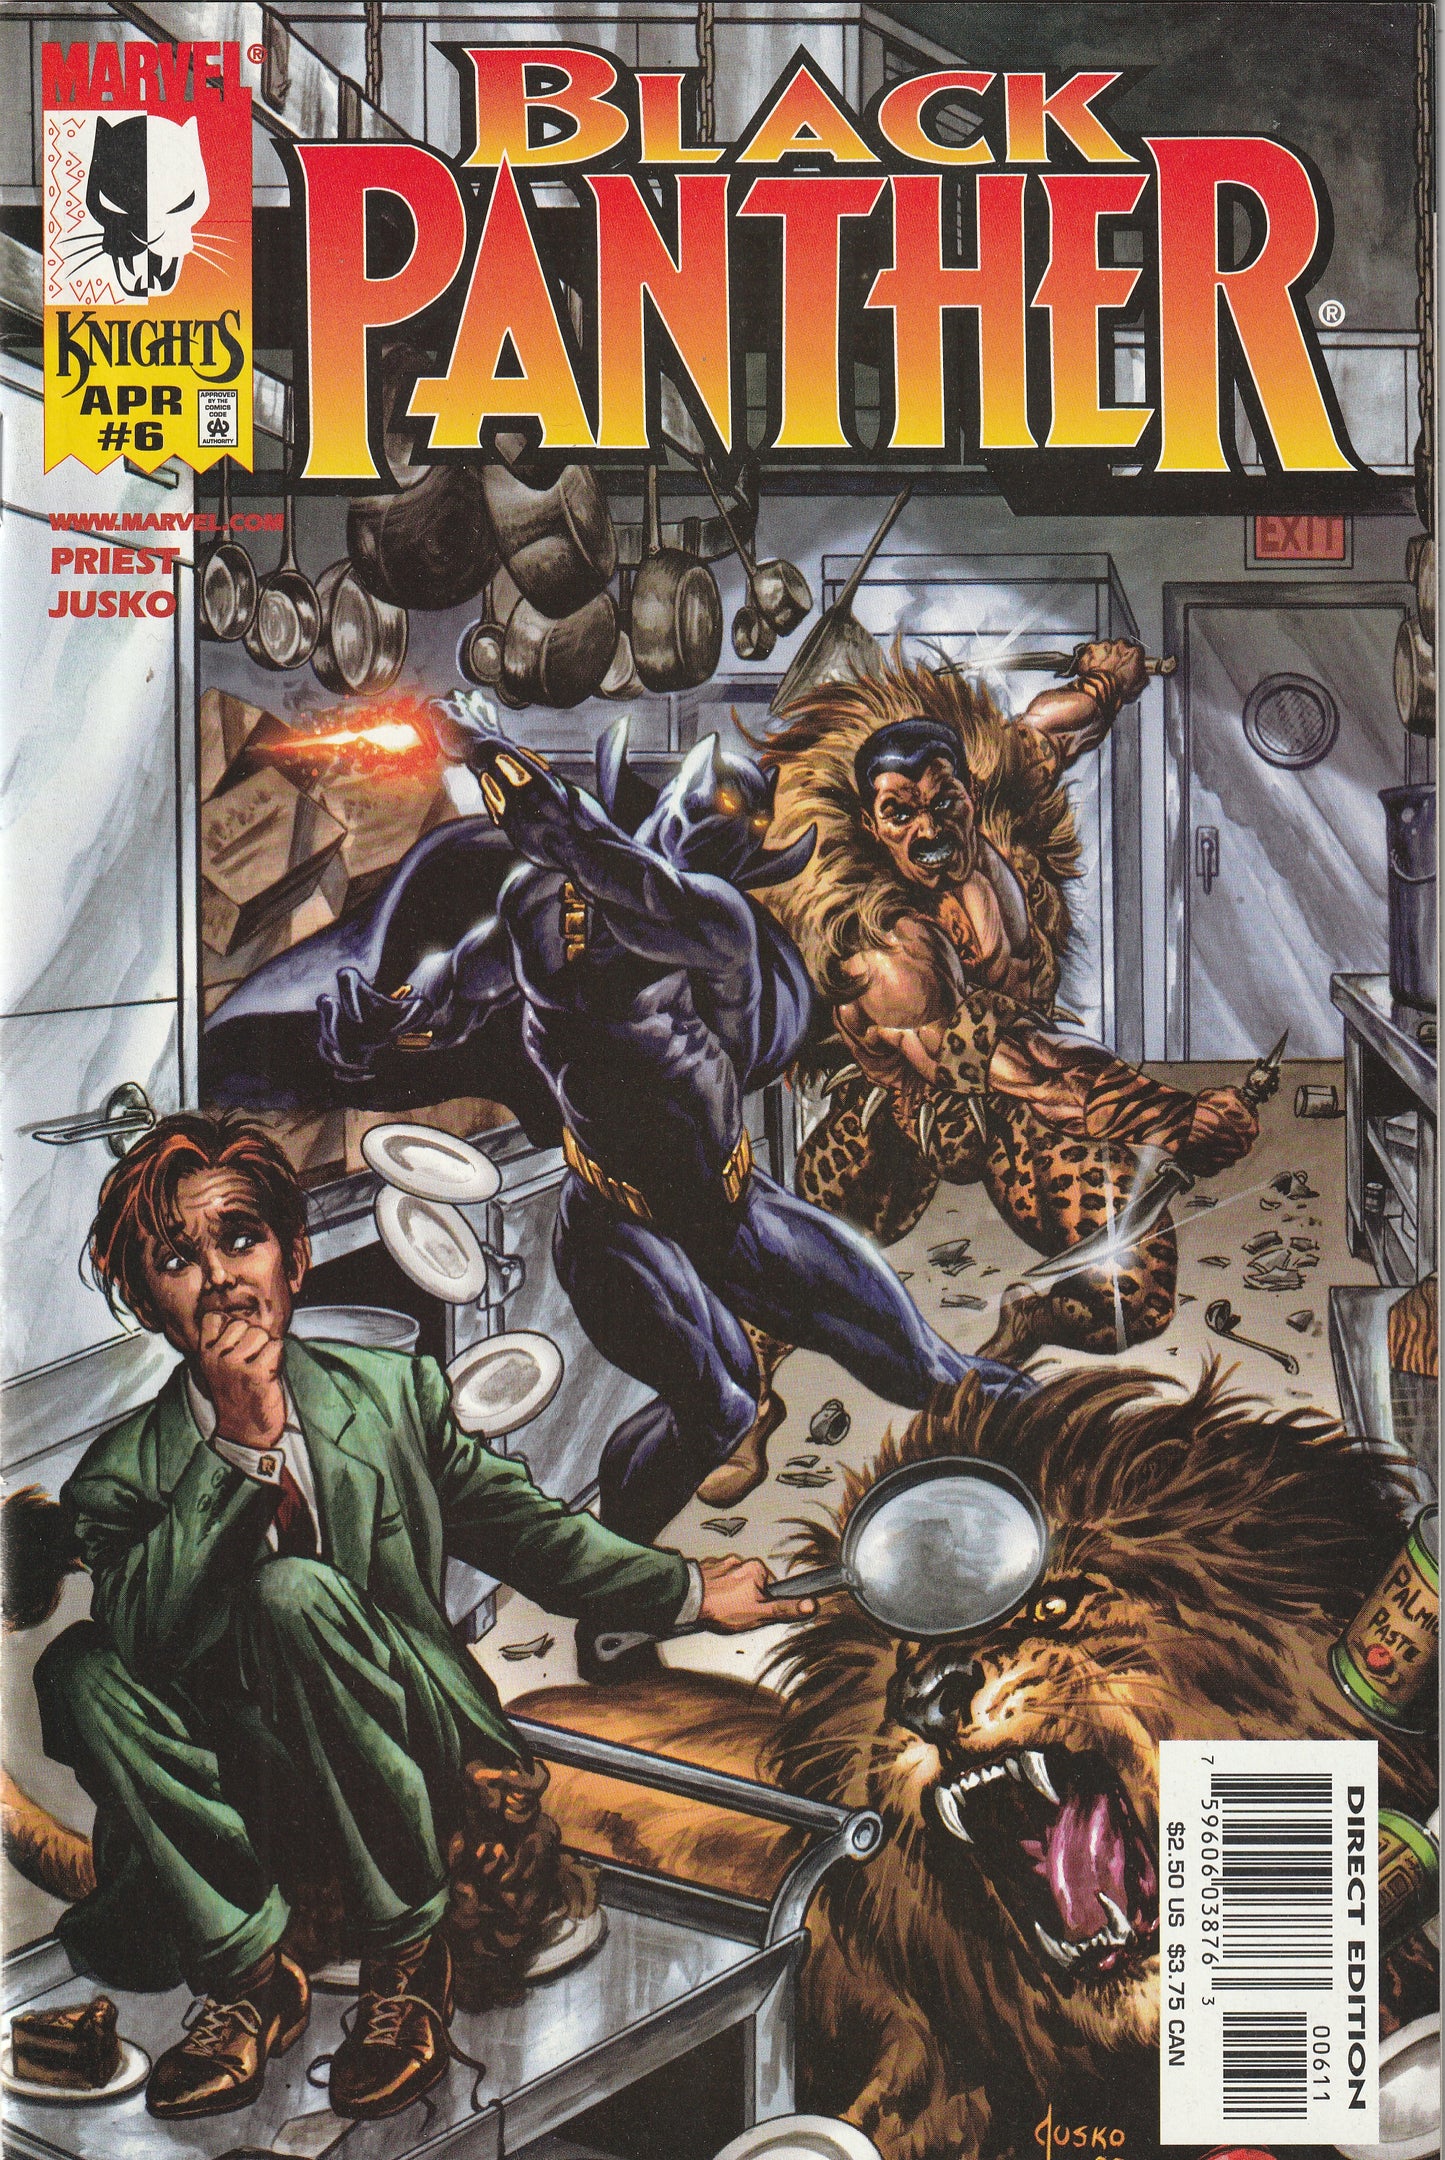 Black Panther #6 (1999) - Marvel Knights